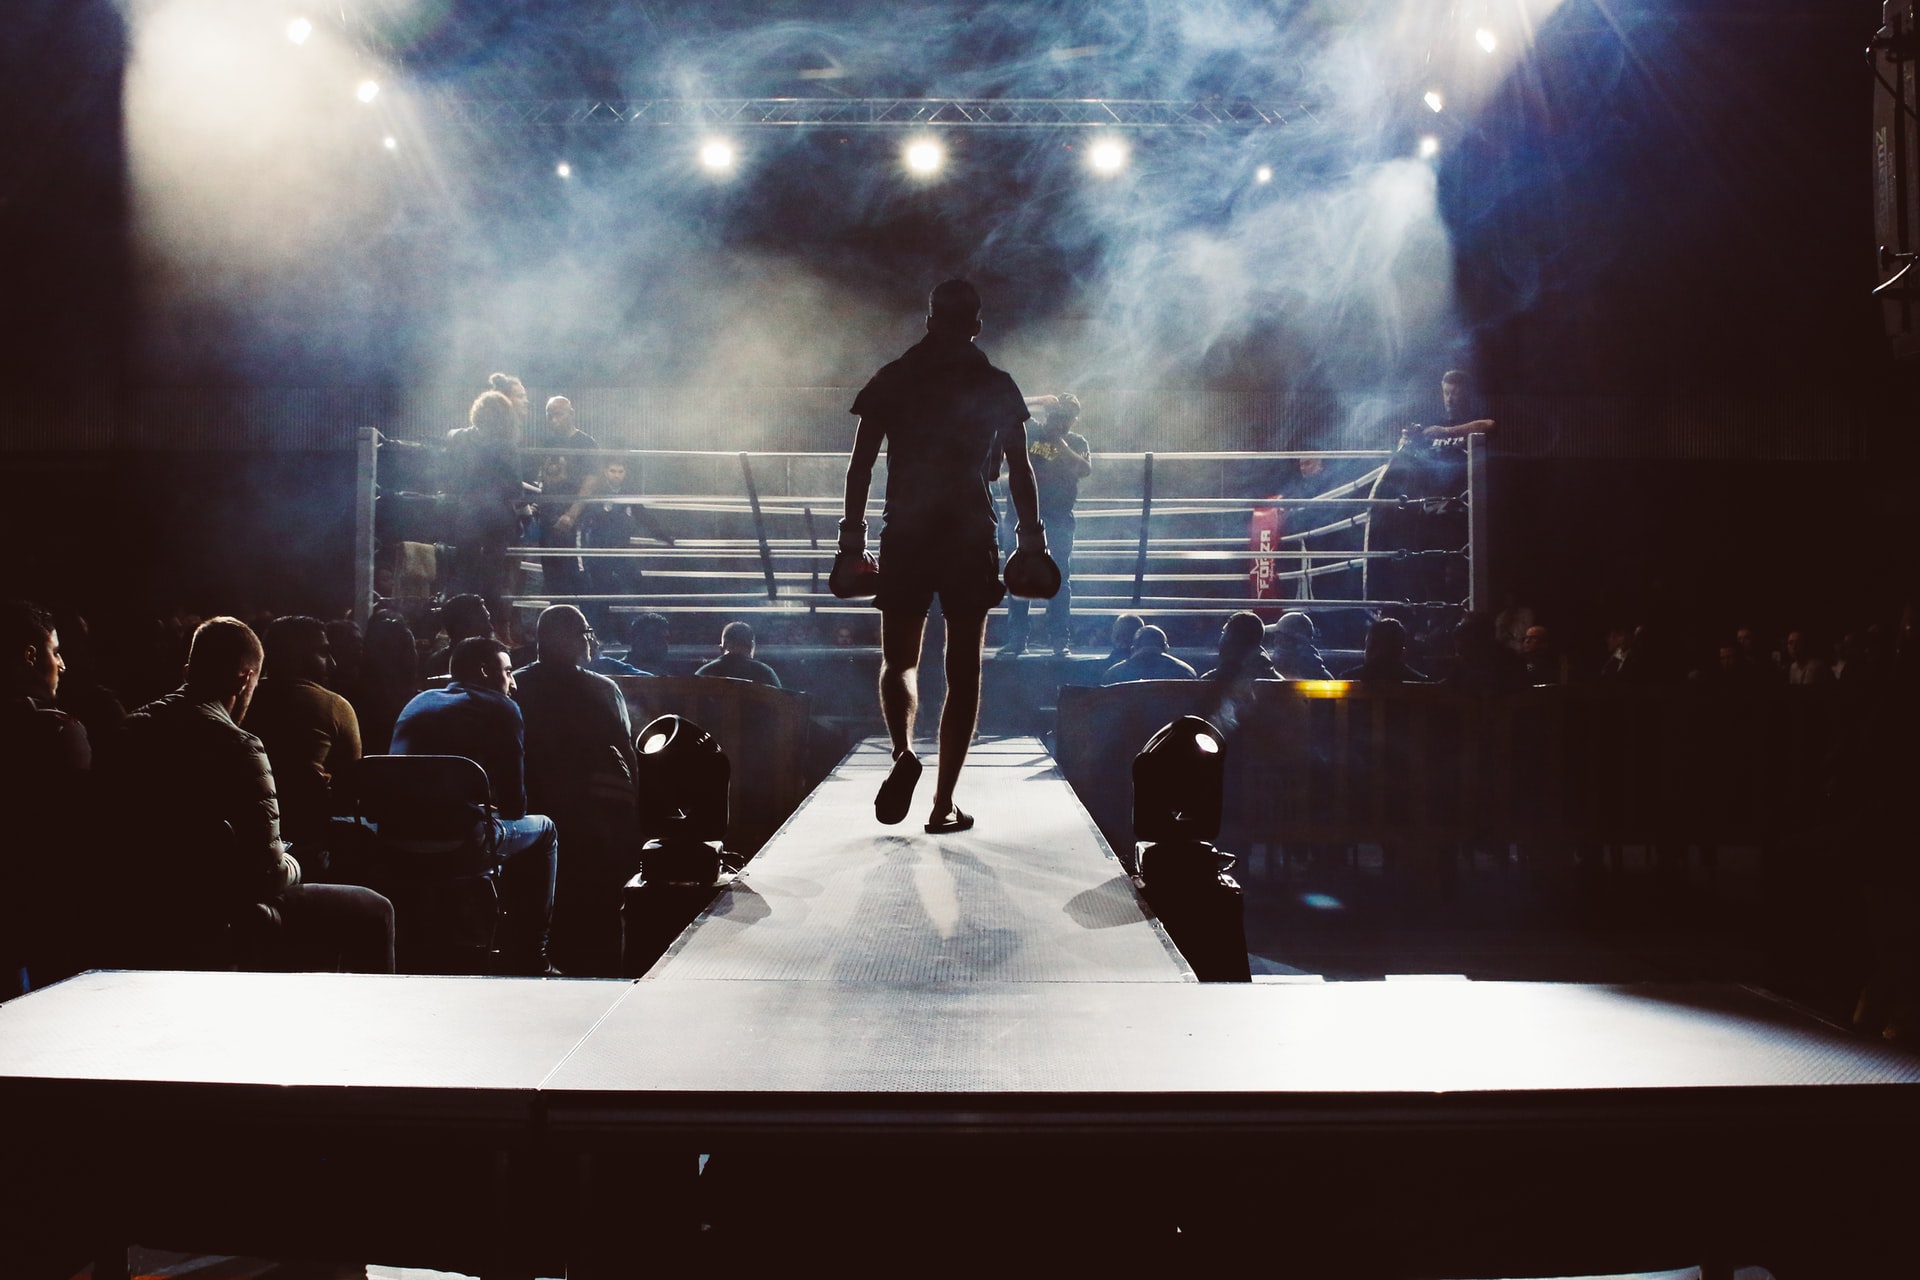 Boxer walking out to the arena for a match